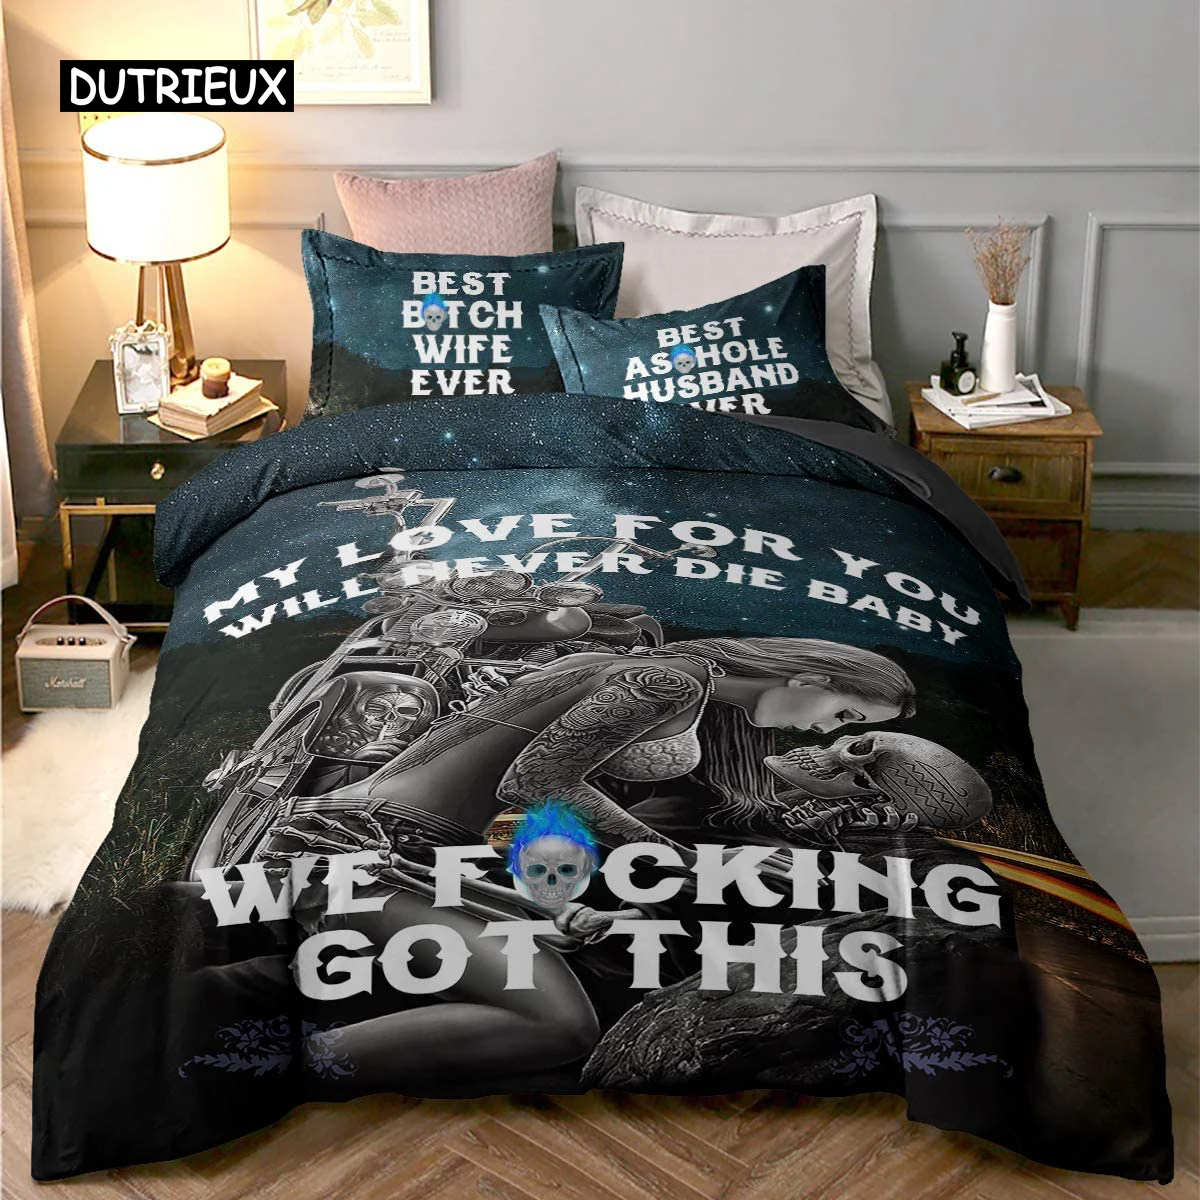 

3D Skull Duvet Cover Set King Size My Love for You Will Never Die Baby Printed Bedding Duvet Cover with Zipper Closure Ties